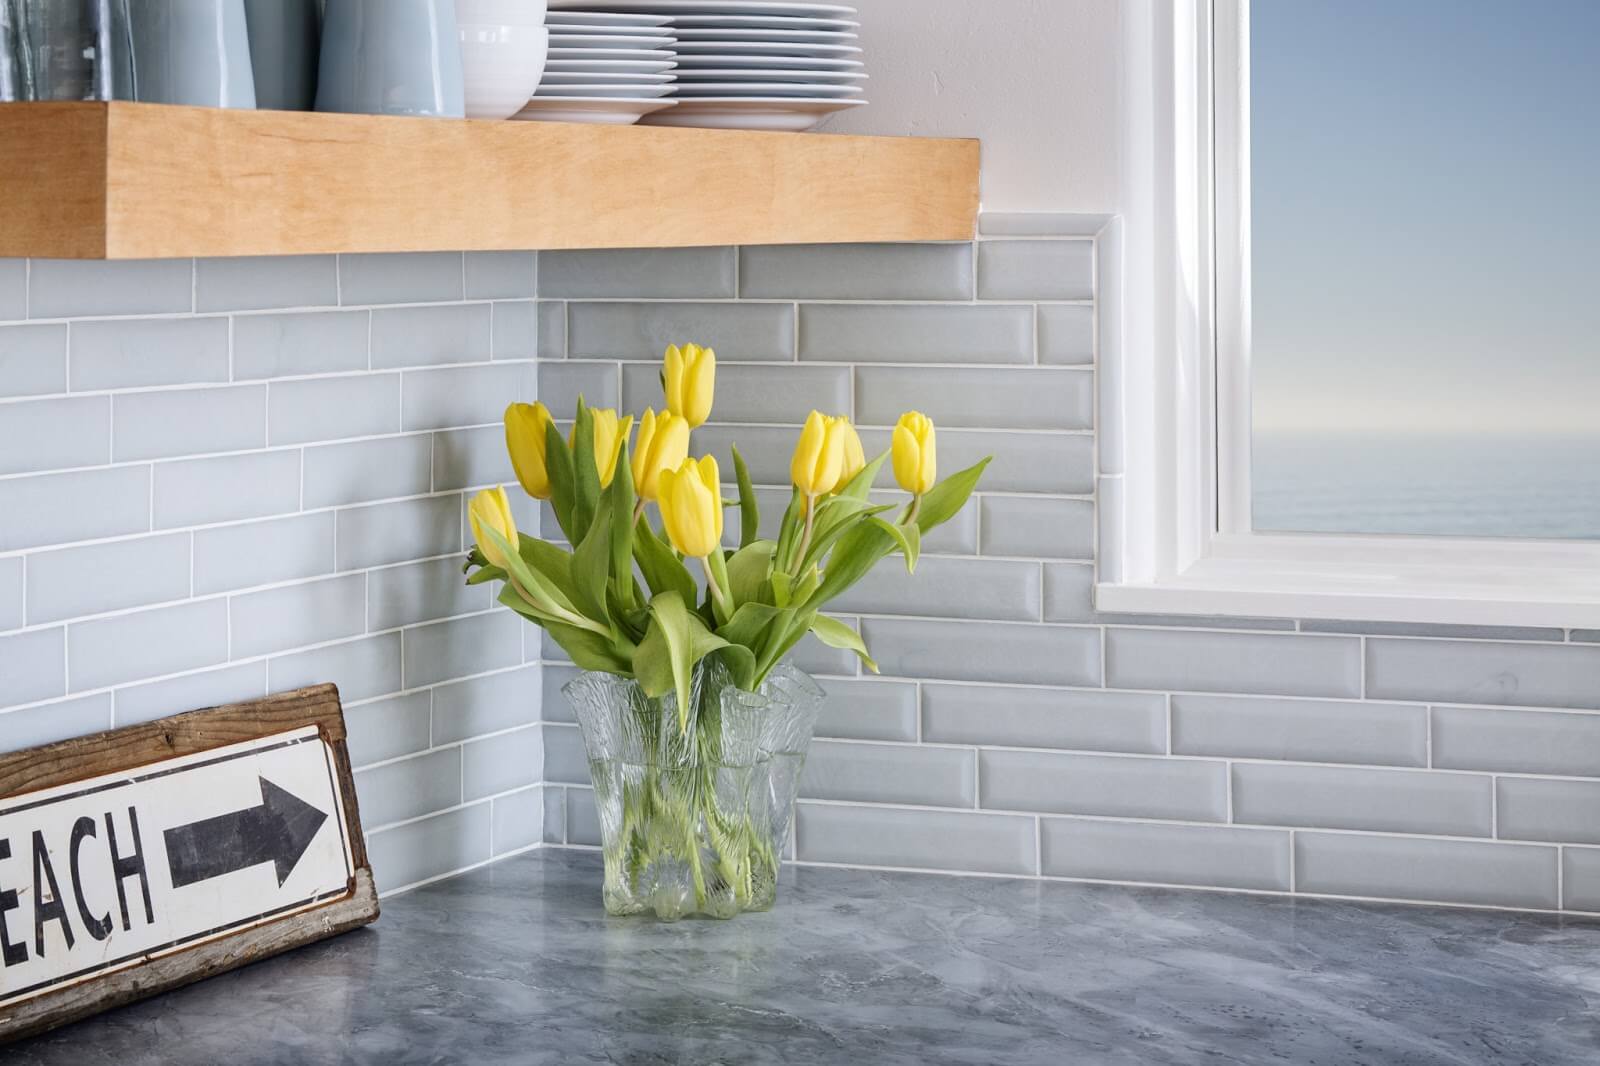 Yellow tulips on a kitchen counter with baby blue subway tile backsplash